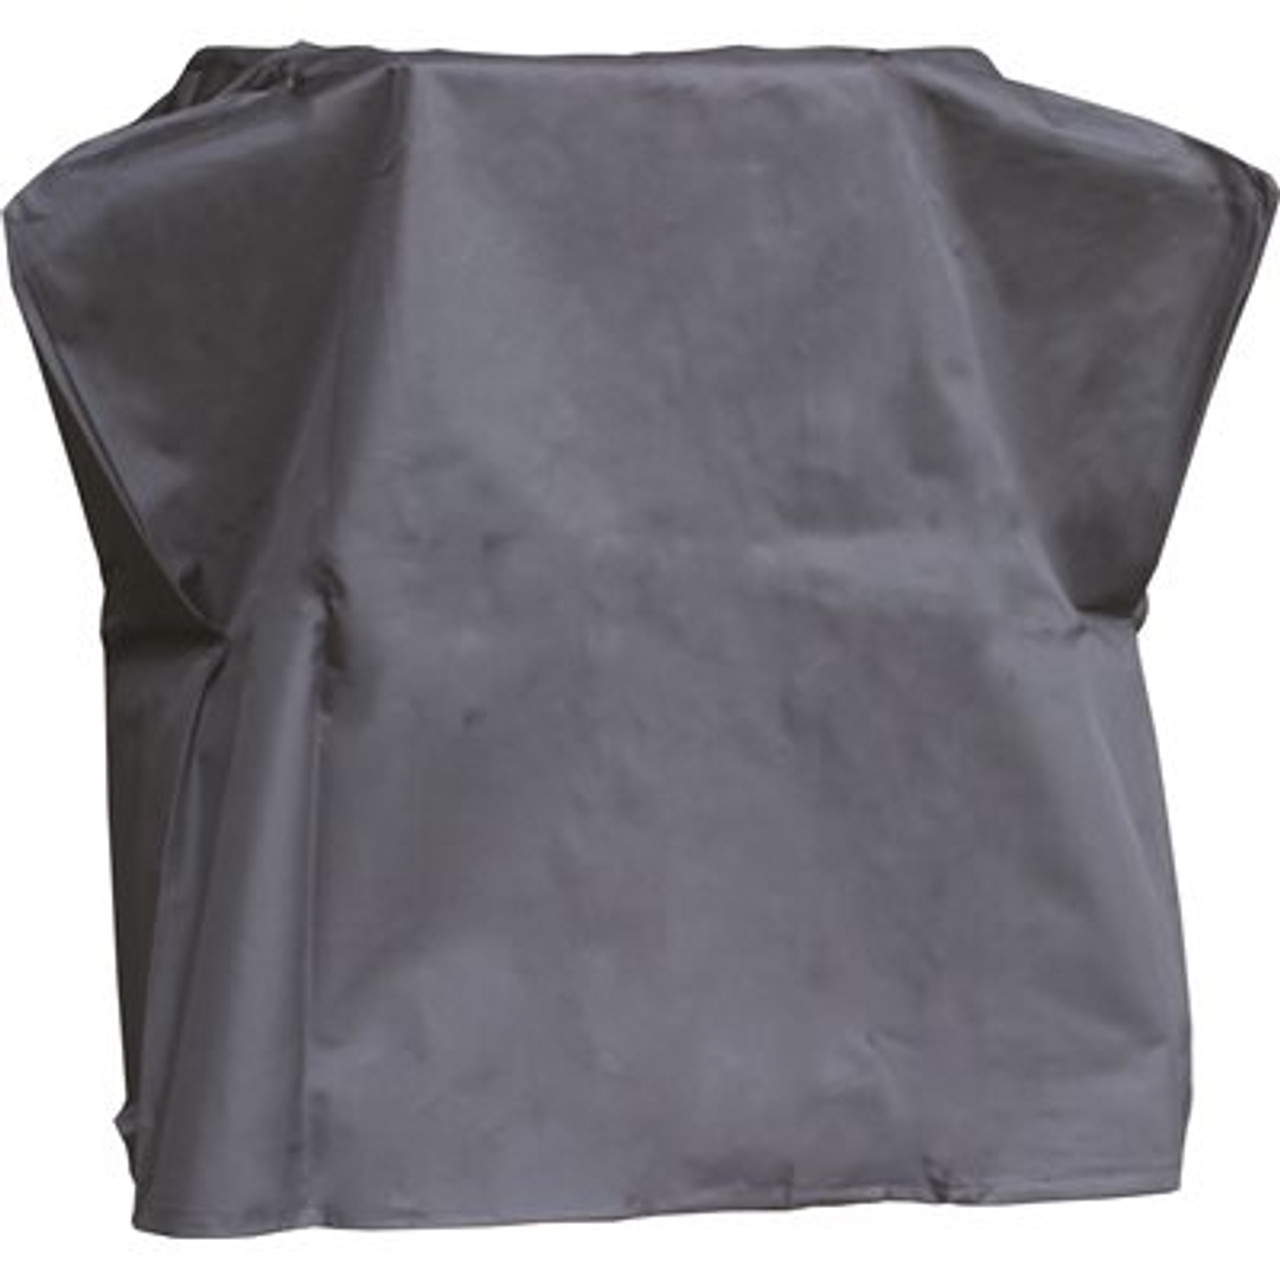 PORTACOOL Evaporative Cooler Cover for 16 in. Units